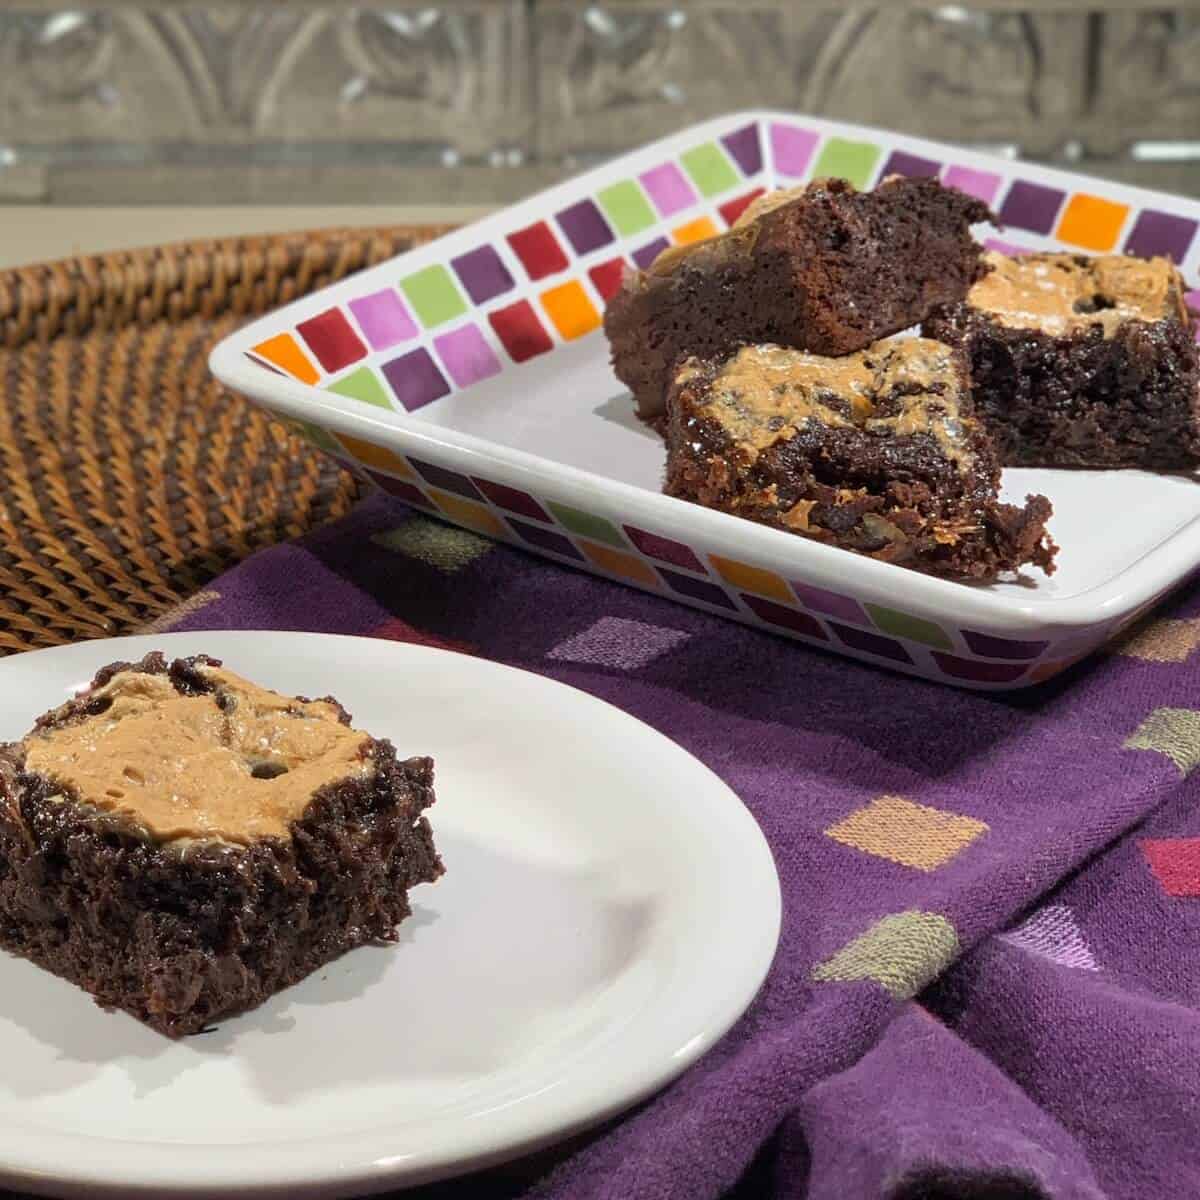 Marshmallow topped brownie on a white plate with more brownies on a multicolored checked plate behind on a purple checked towel.